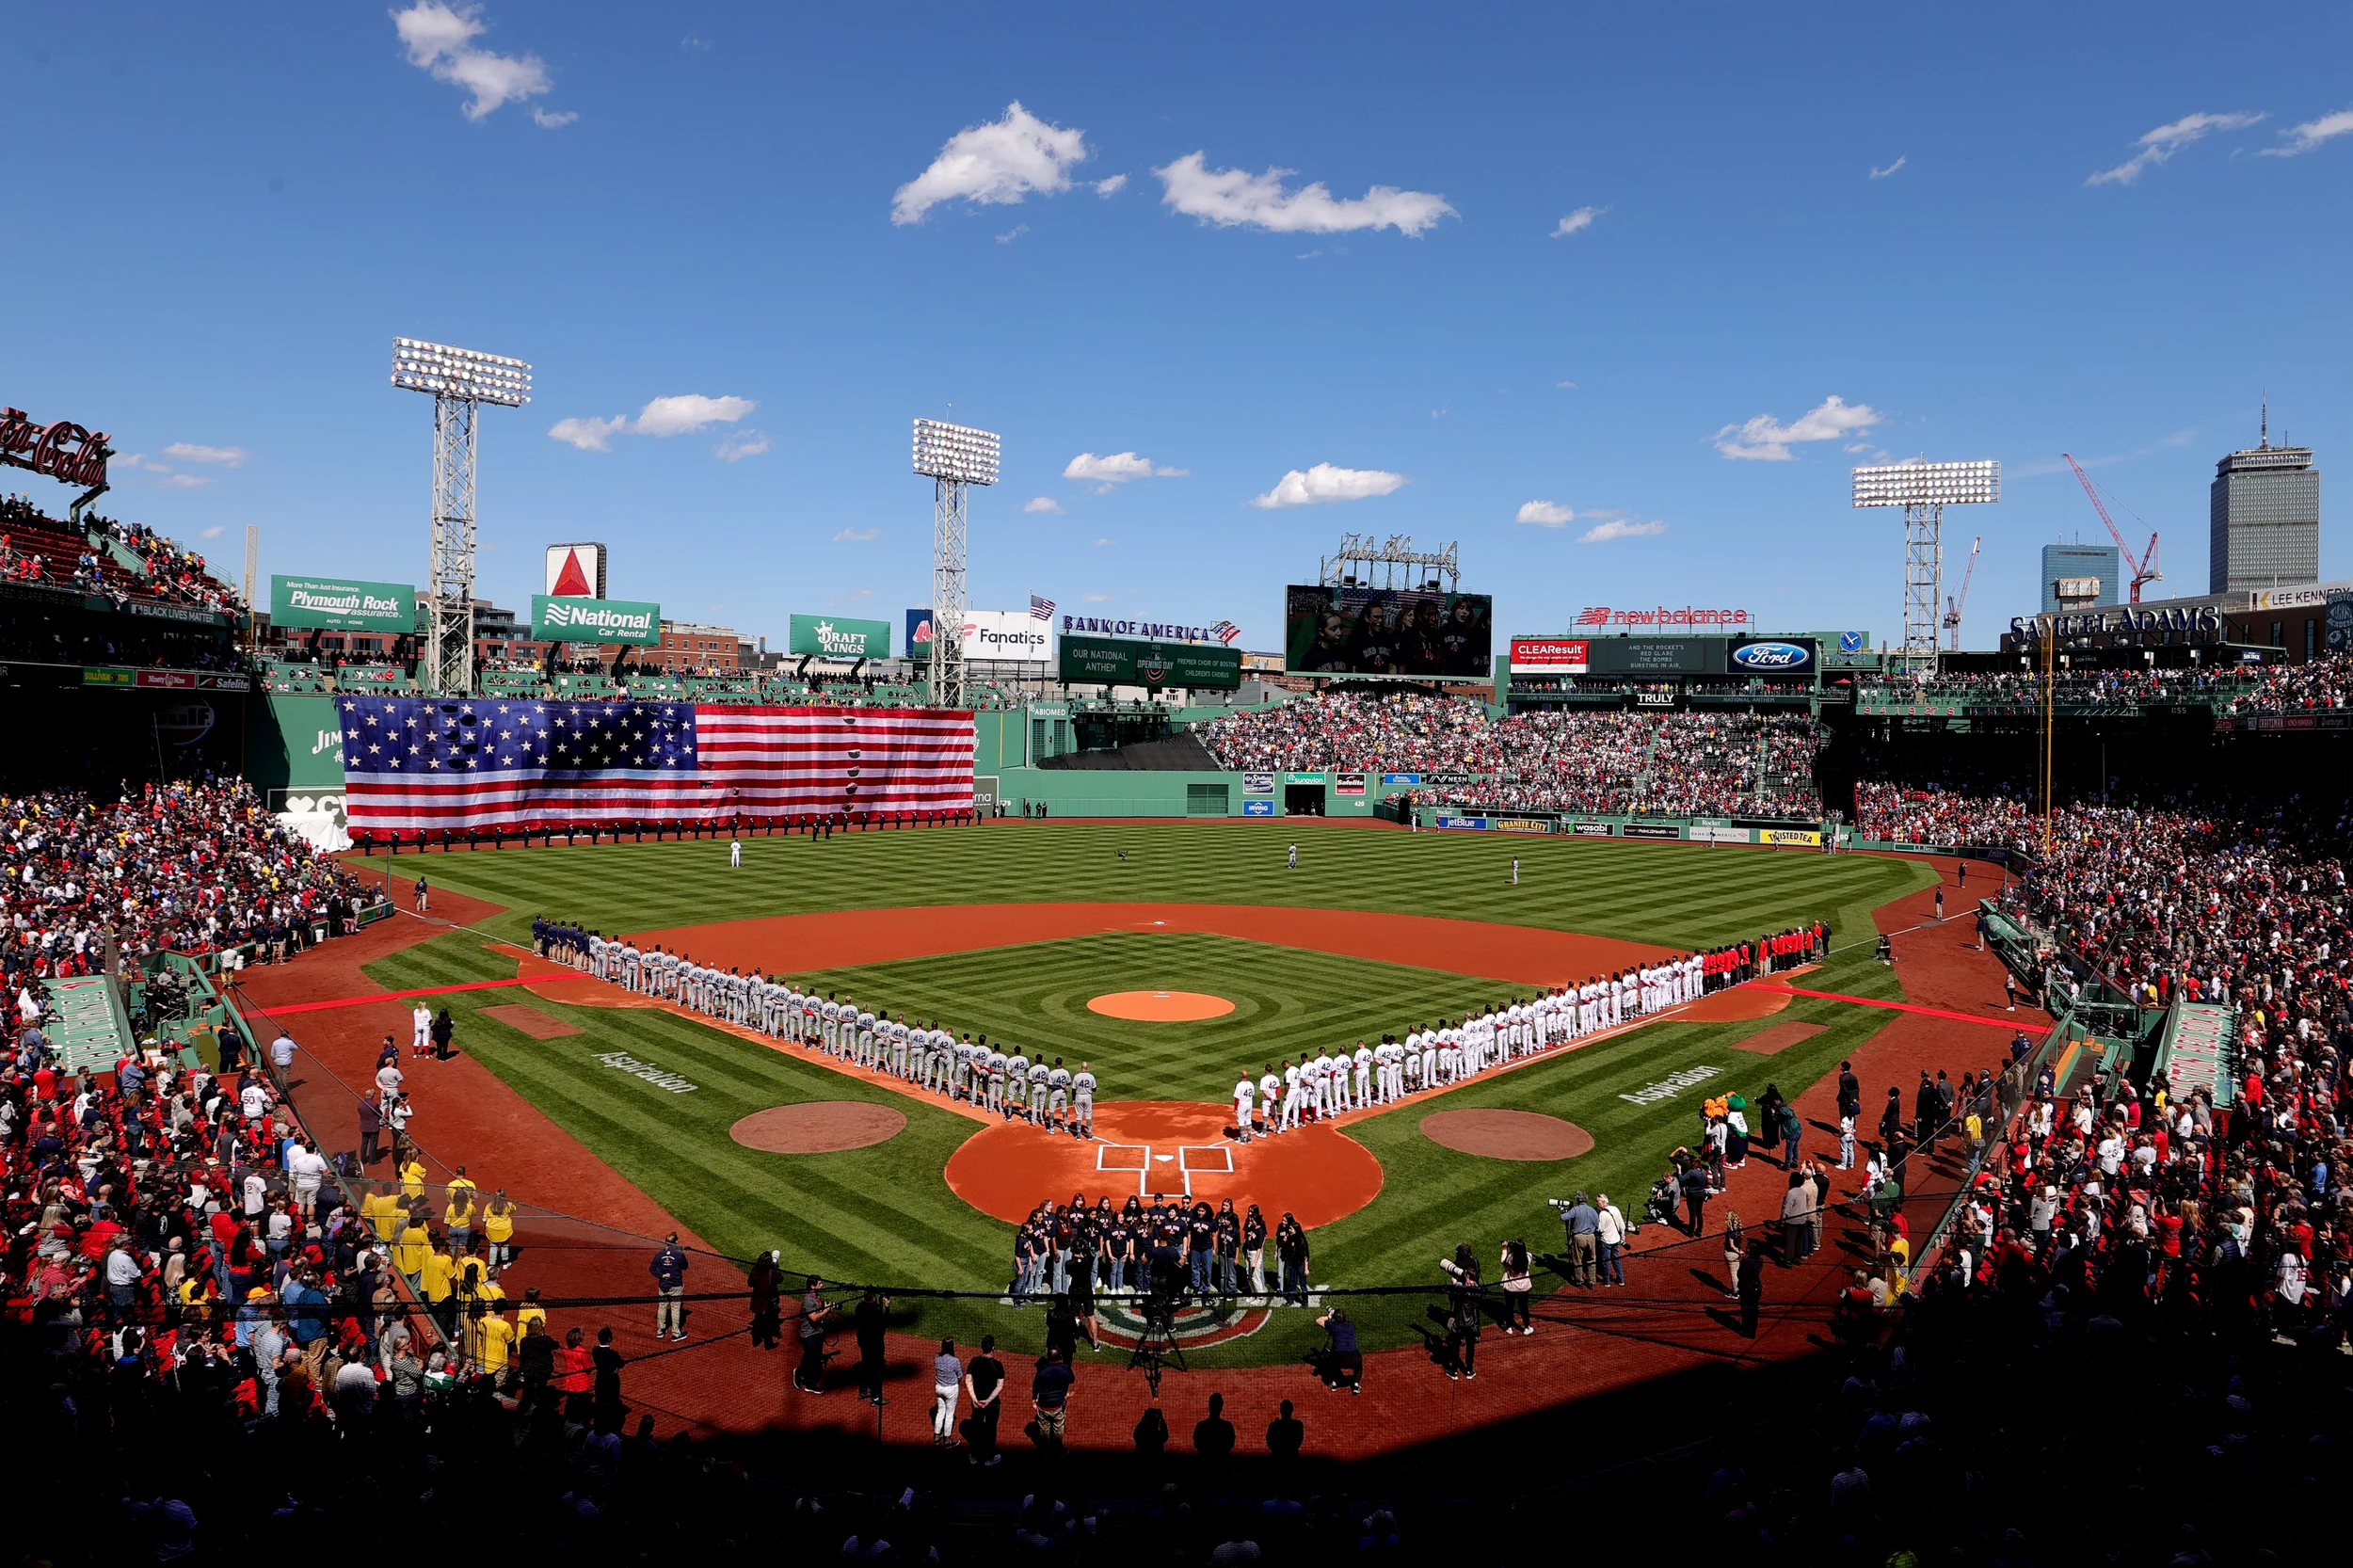 A Day at Boston's Fenway Park Wasn't What I Remembered